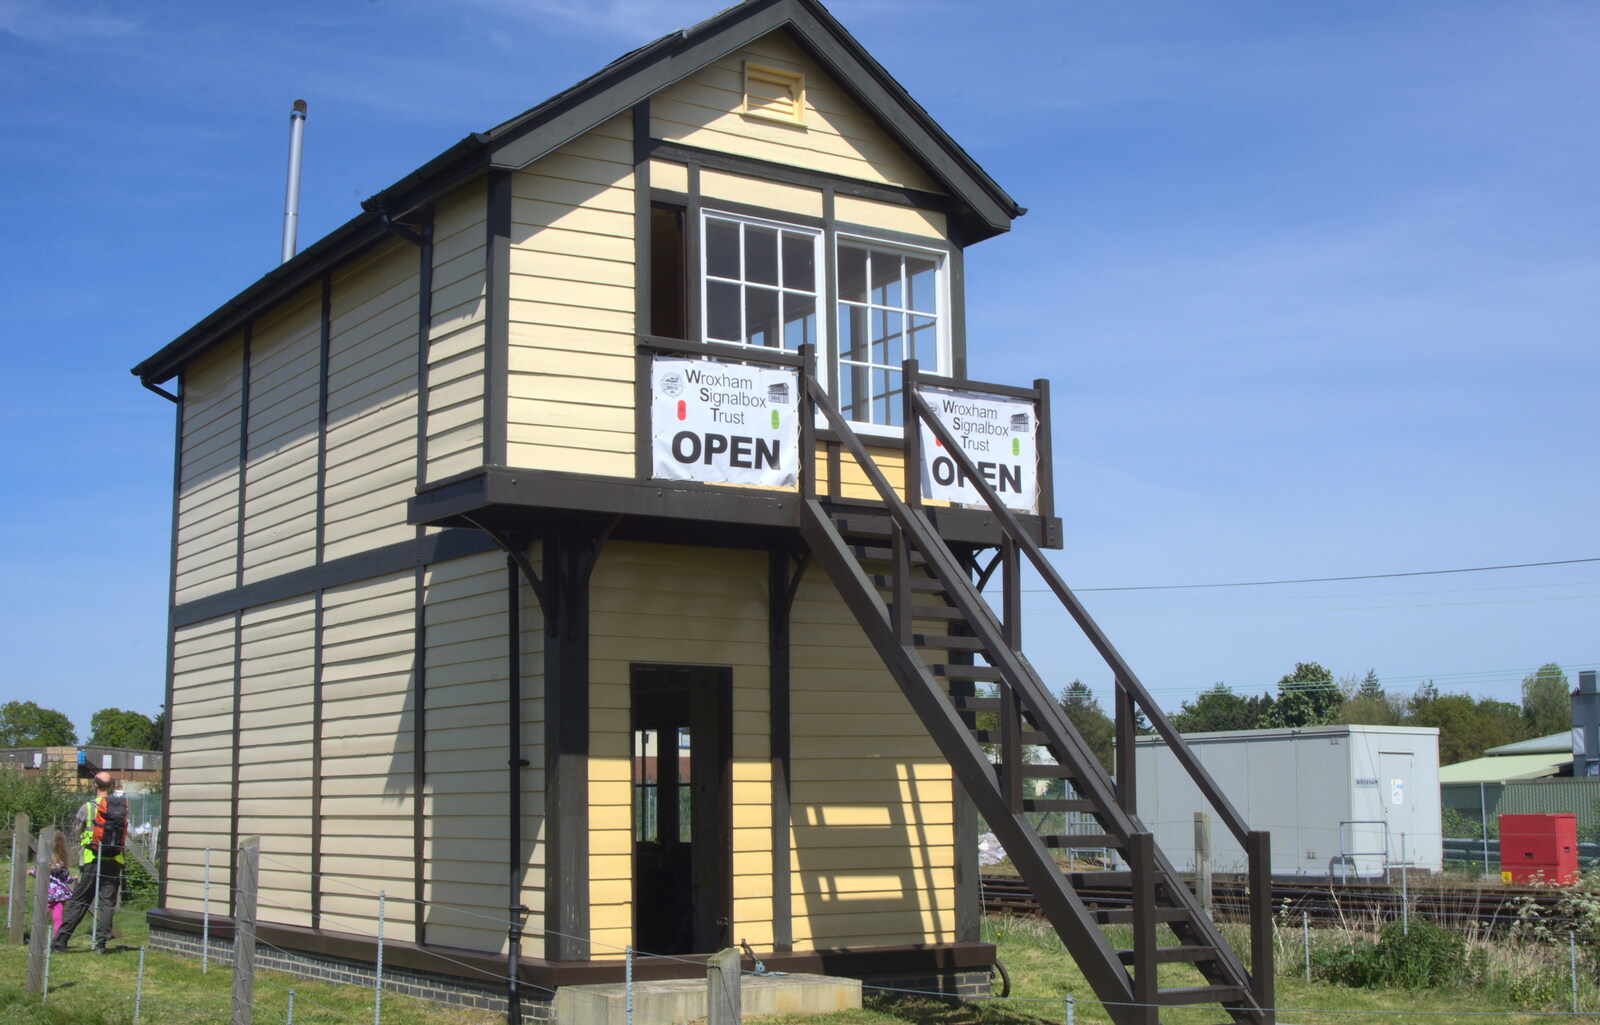 The Wroxham signal box from The Bure Valley Railway, Aylsham, Norfolk - 26th May 2013